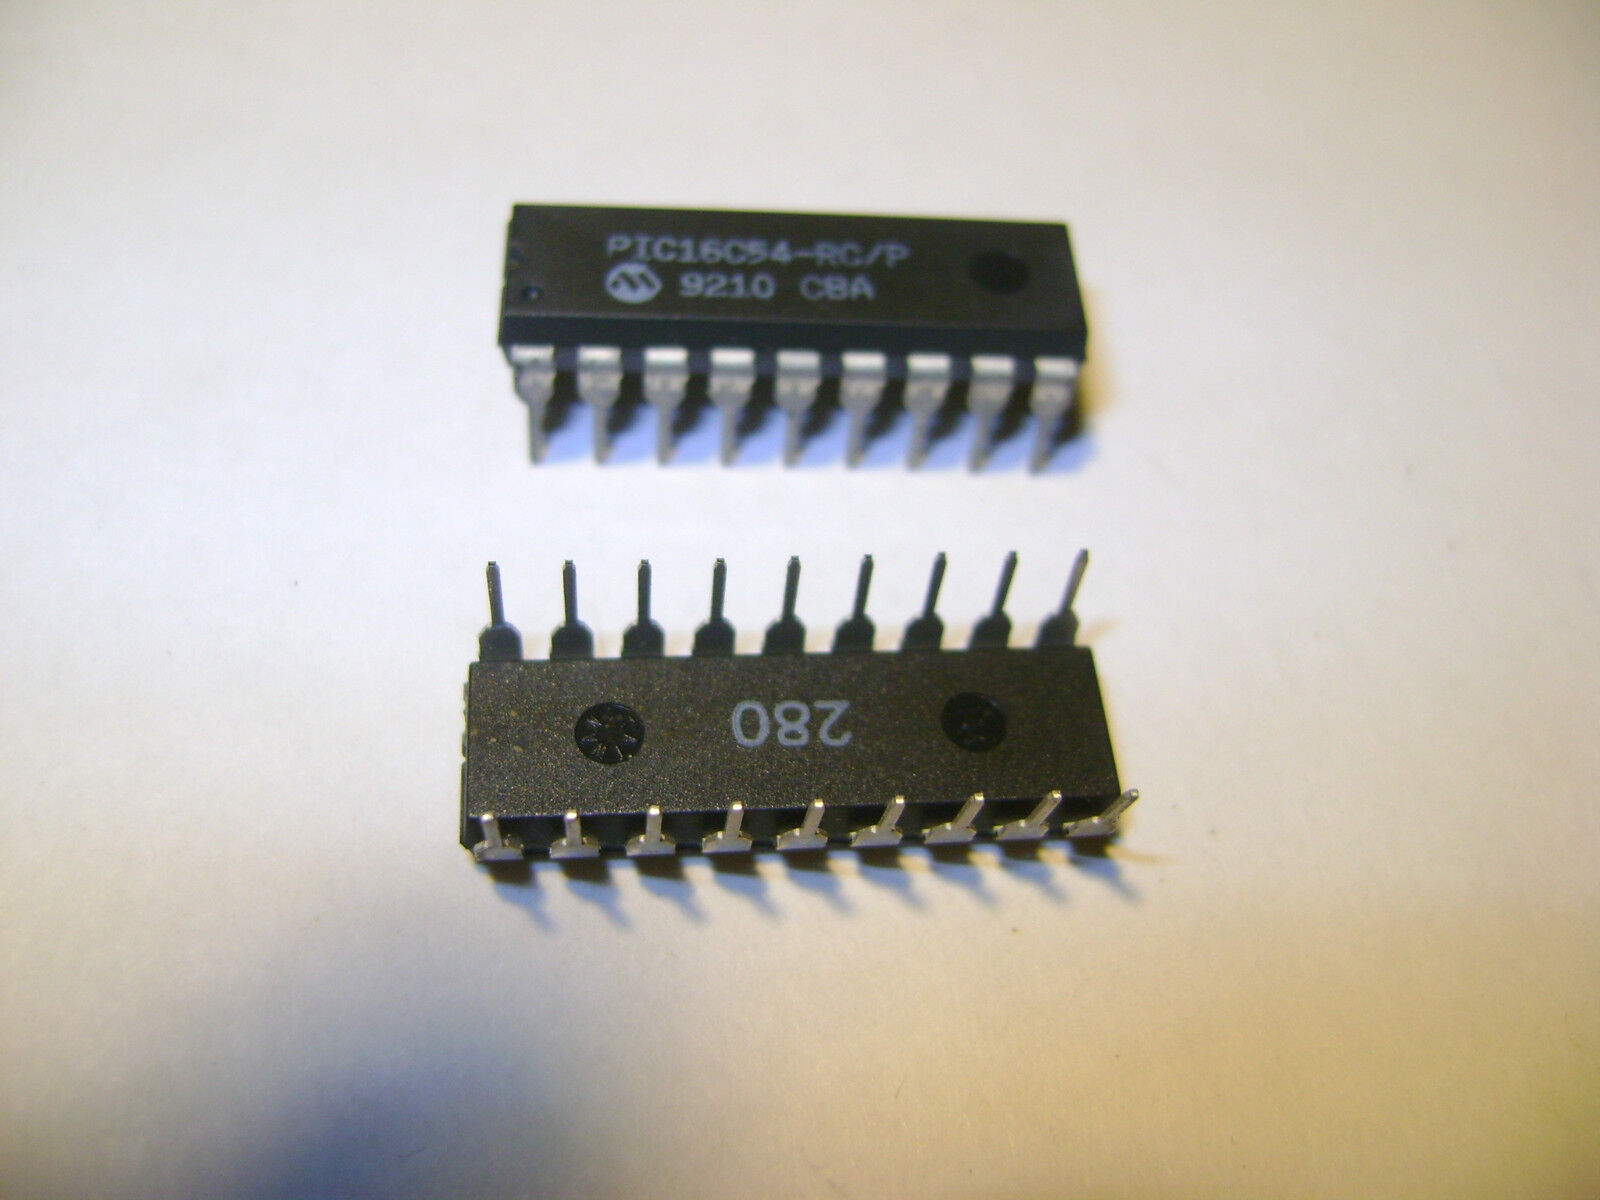 NEW PIC16C54-RC/P INTEGRATED CIRCUIT IC CHIP SHIPS FROM USA DR2